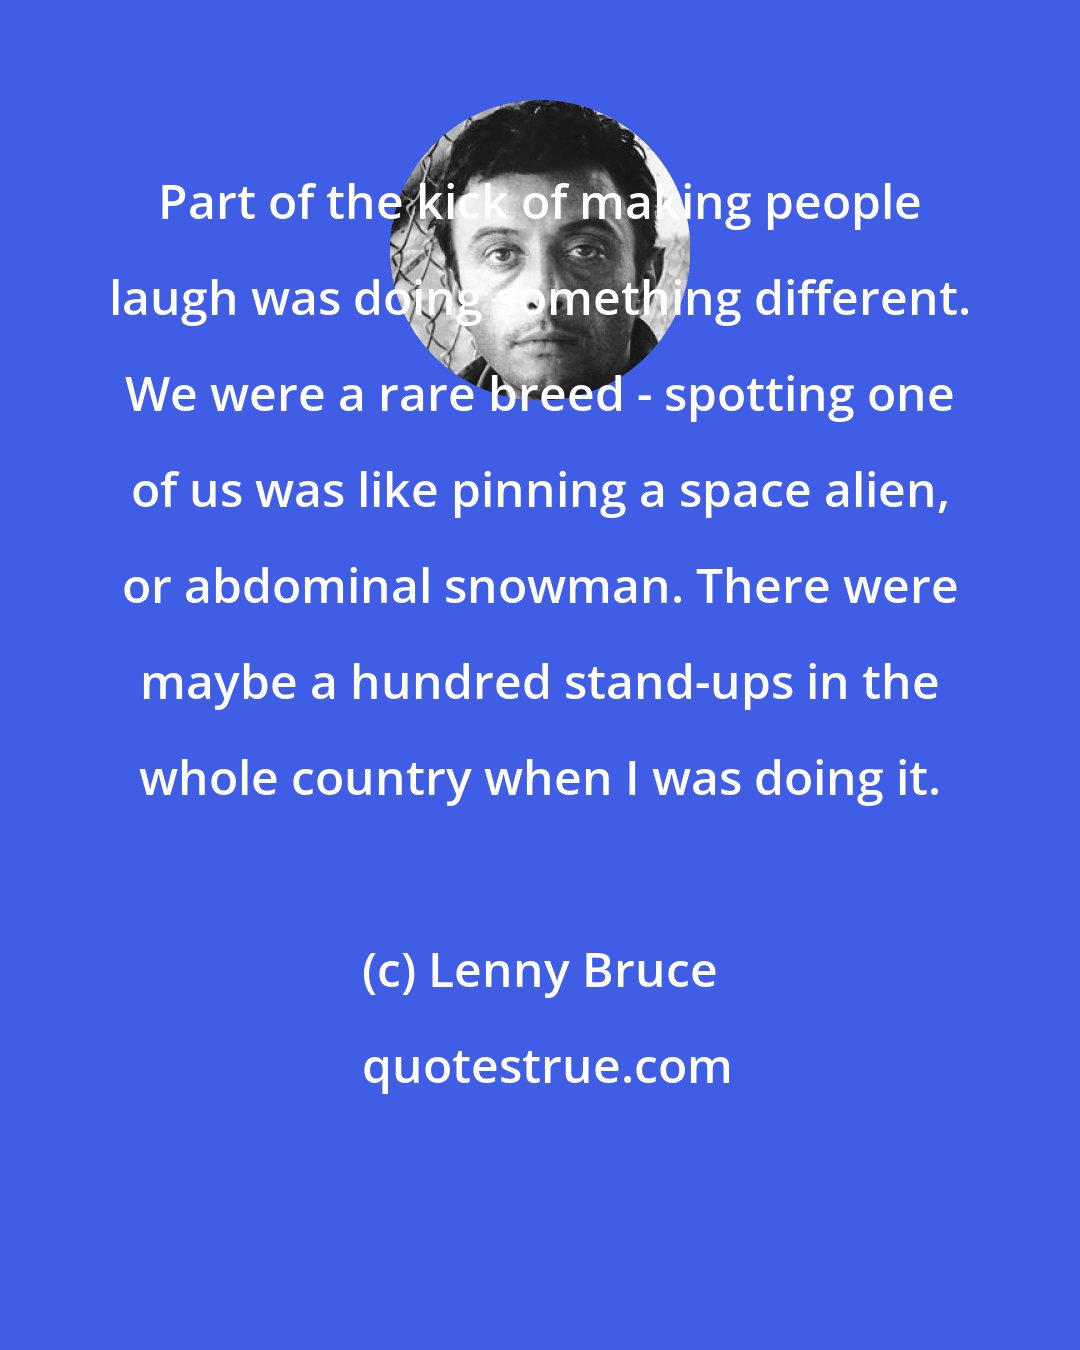 Lenny Bruce: Part of the kick of making people laugh was doing something different. We were a rare breed - spotting one of us was like pinning a space alien, or abdominal snowman. There were maybe a hundred stand-ups in the whole country when I was doing it.